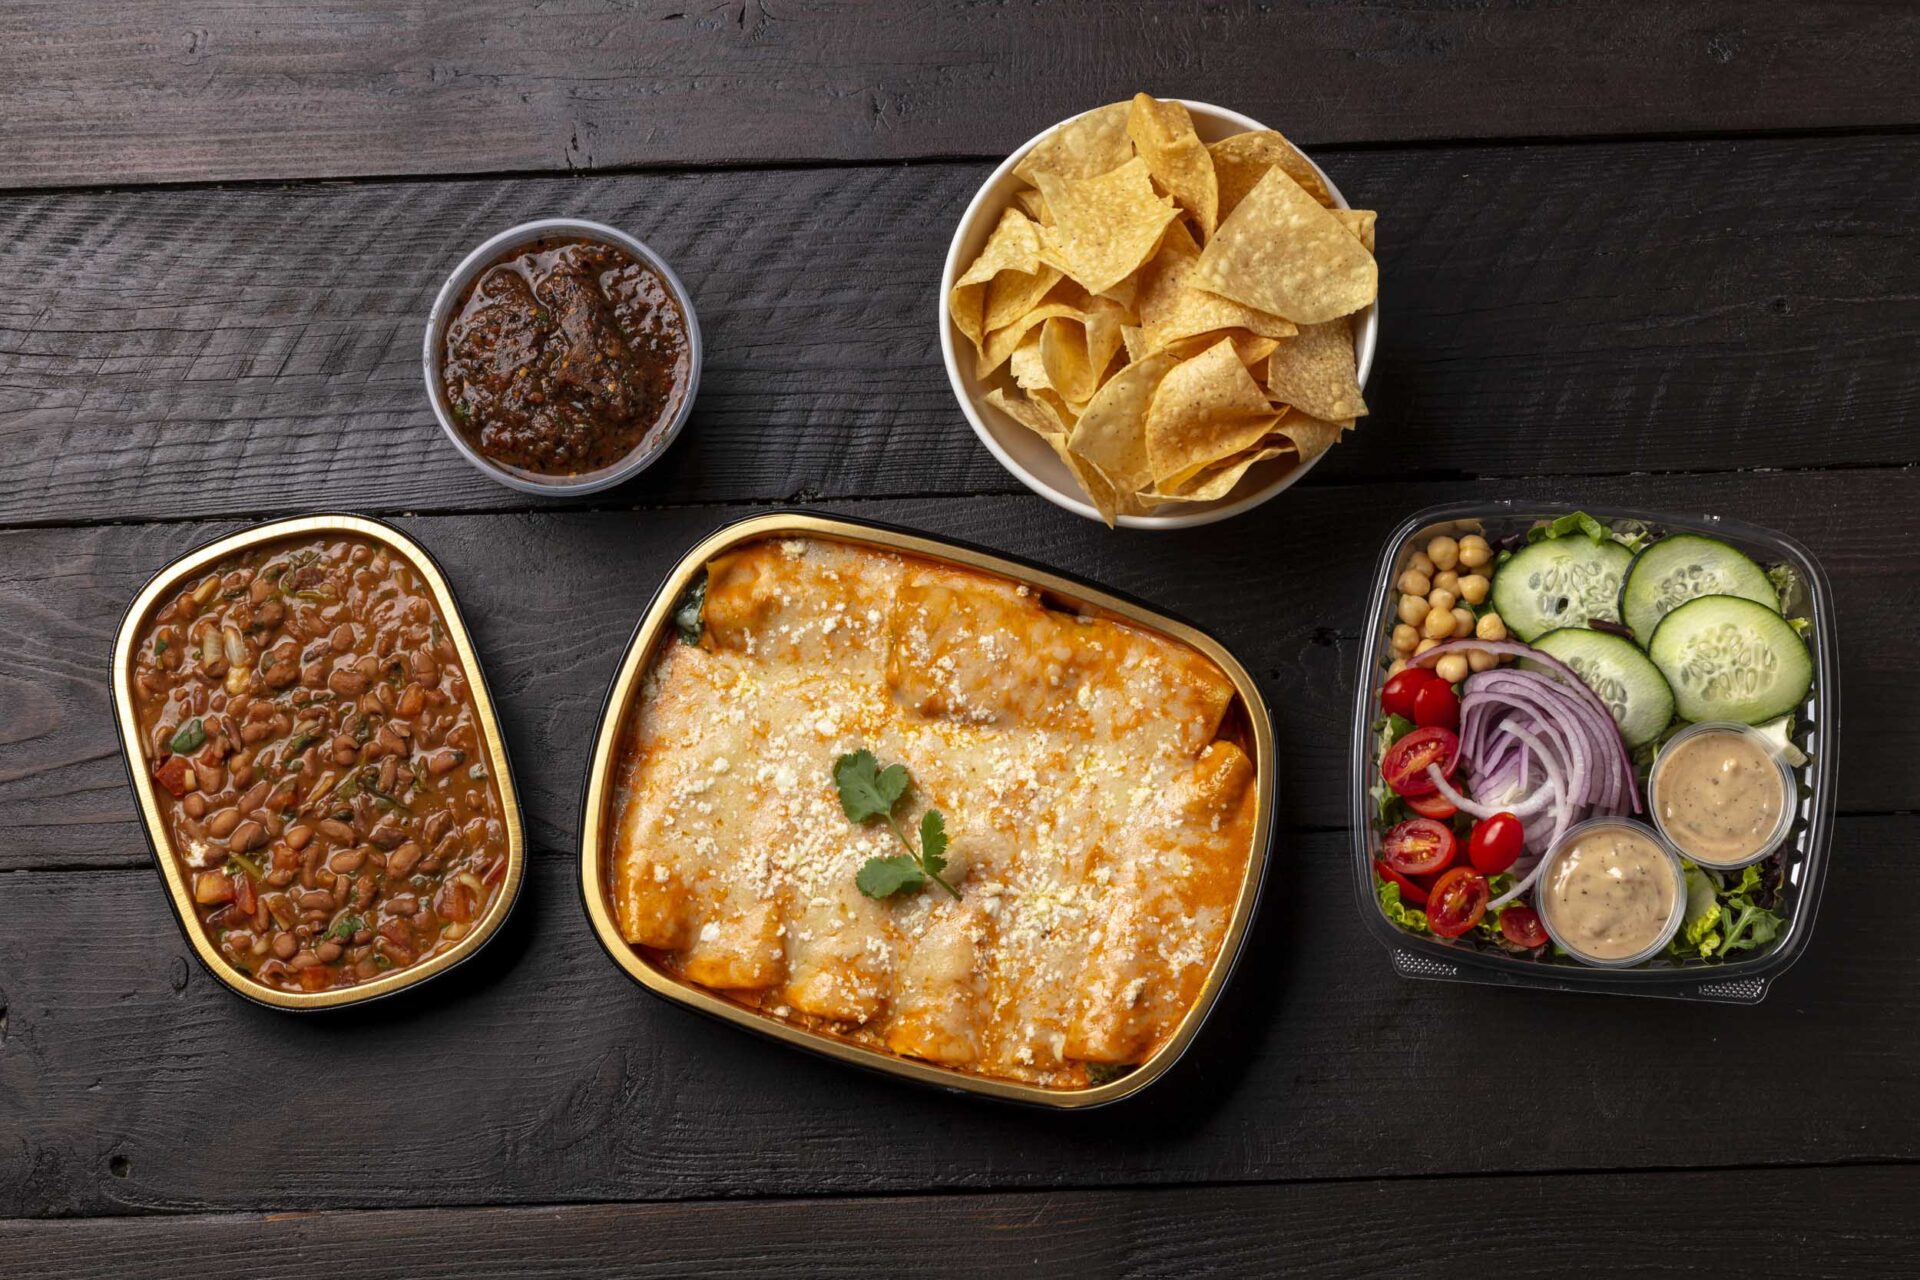 Family-Style To-Go
<br>Enjoy Hassle-Free, Flavorful Meals at Home Starting at Only $24